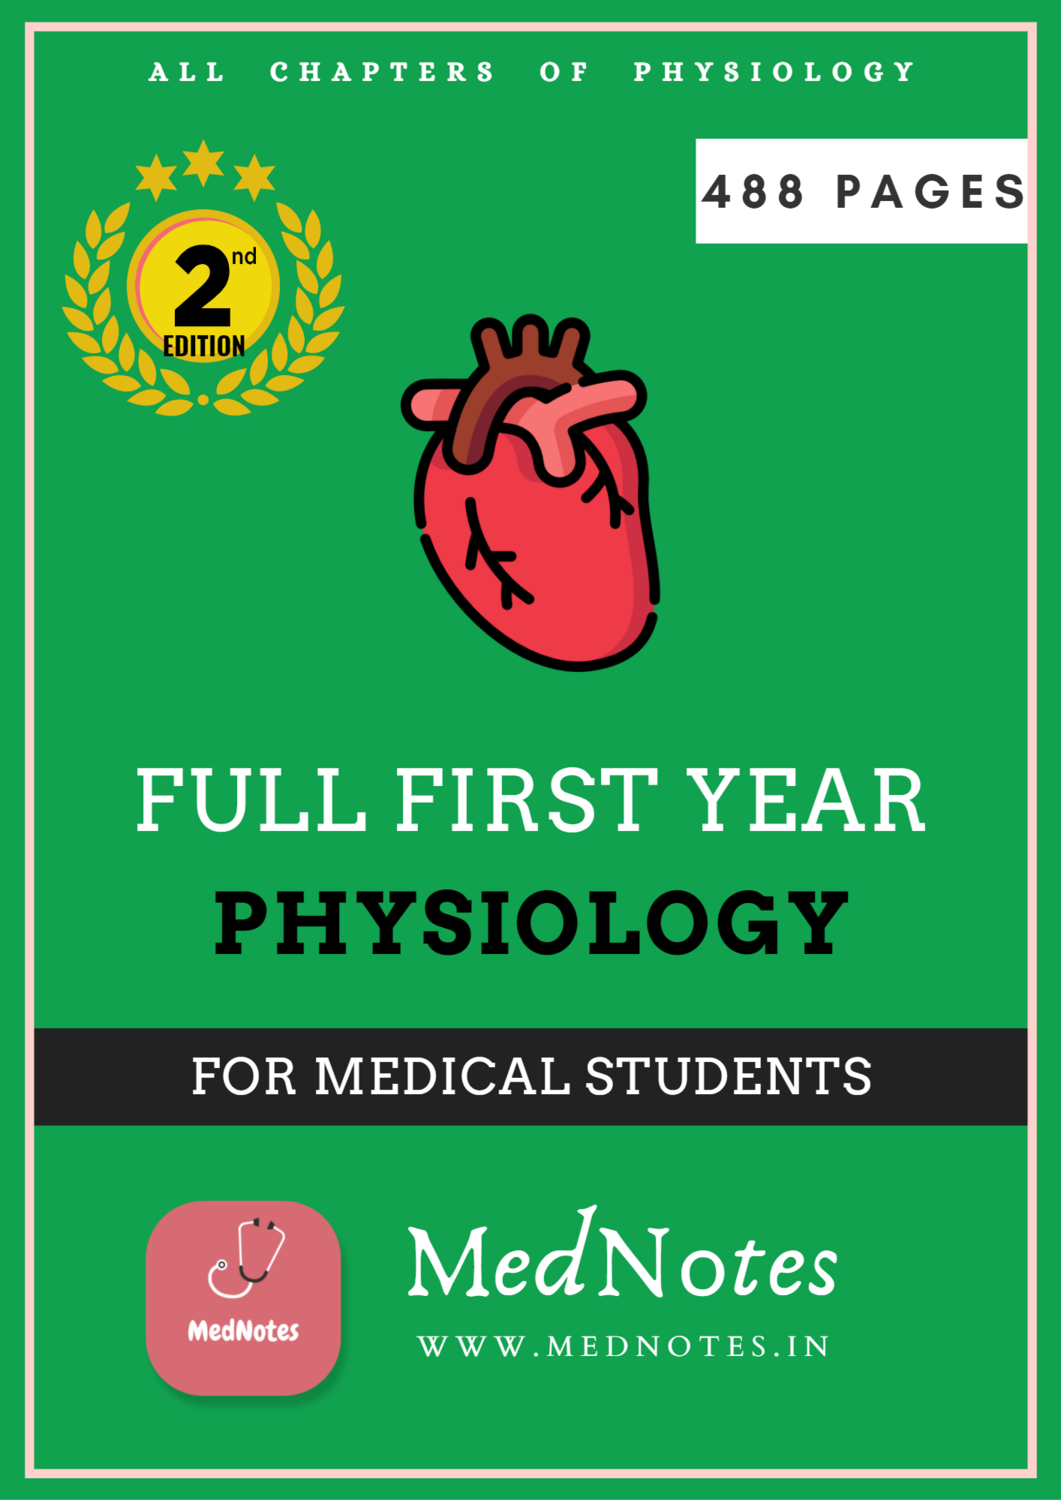 Full First Year Physiology [2nd Edition] - MedNotes Ebook